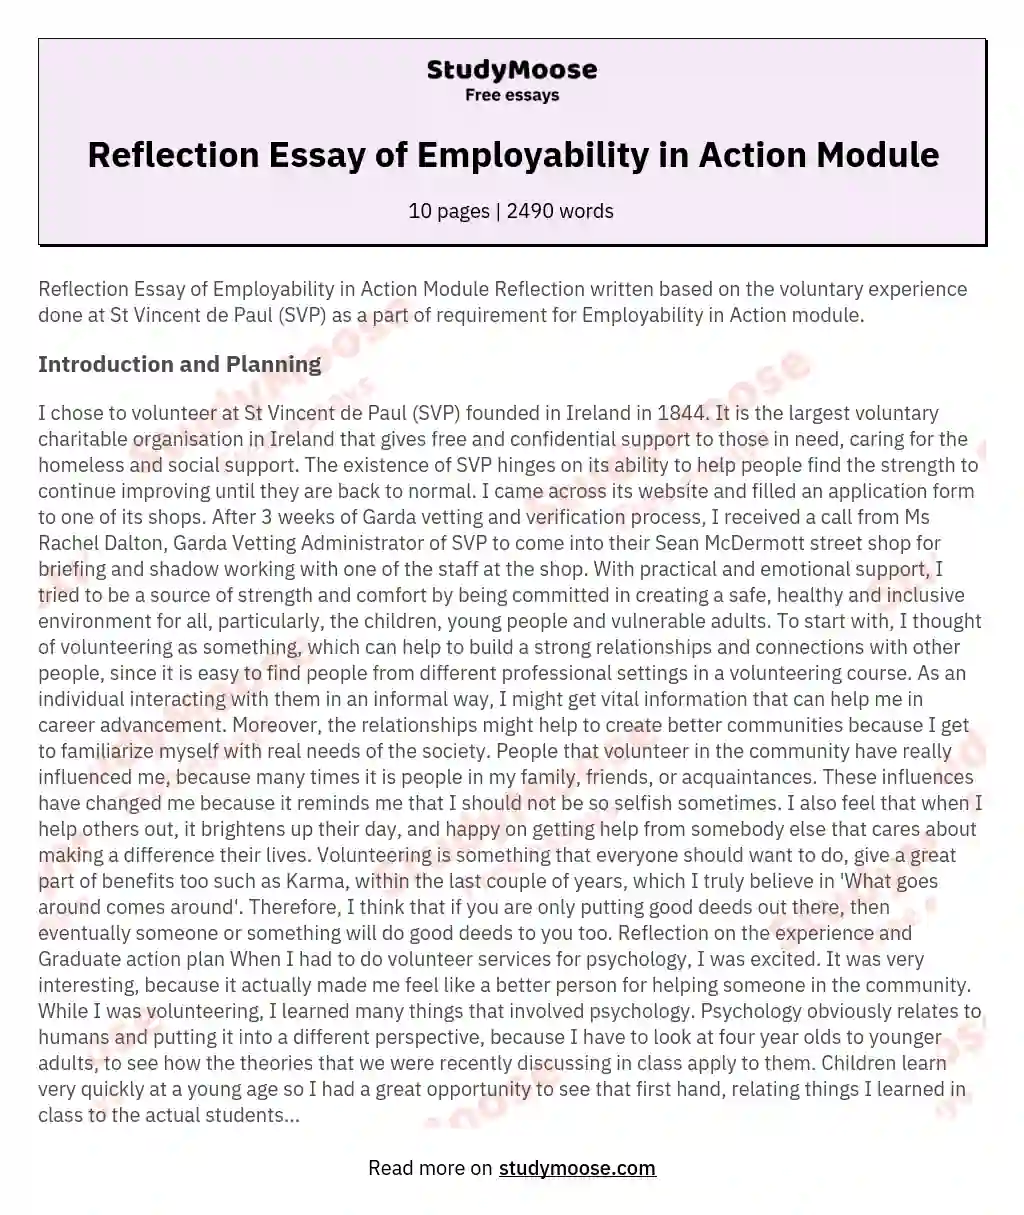 Reflection Essay of Employability in Action Module essay